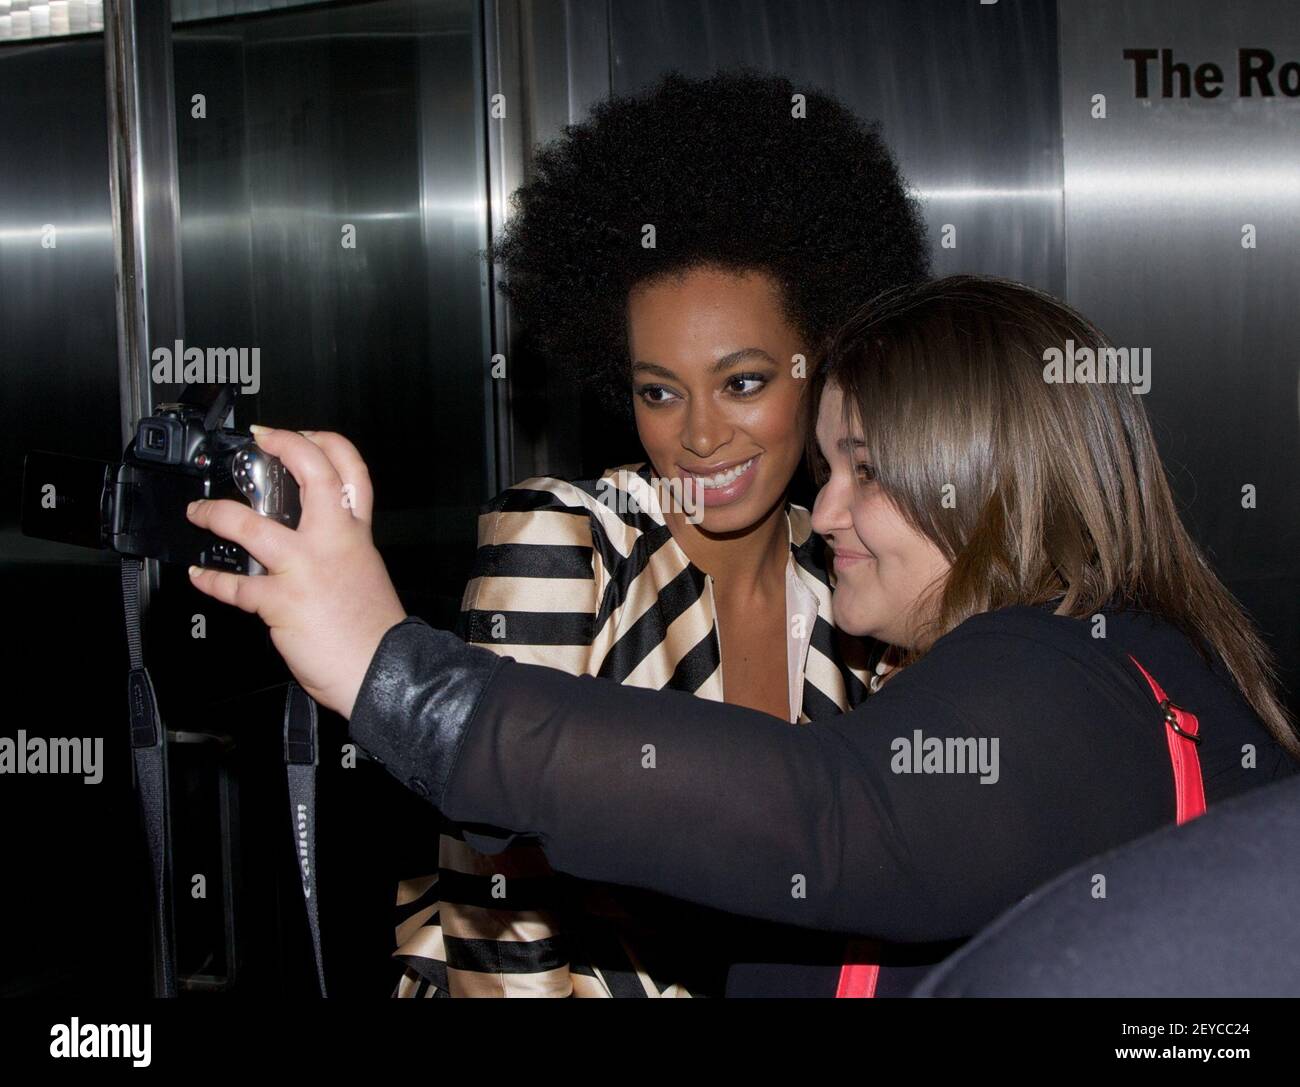 Solange Knowles attends the Pre-Met Ball screening of 'The Great Gatsby' at The Museum of Modern Art on May 5, 2013 in New York City( Photo by Alberto Reyes/Sipa USA ) Stock Photo